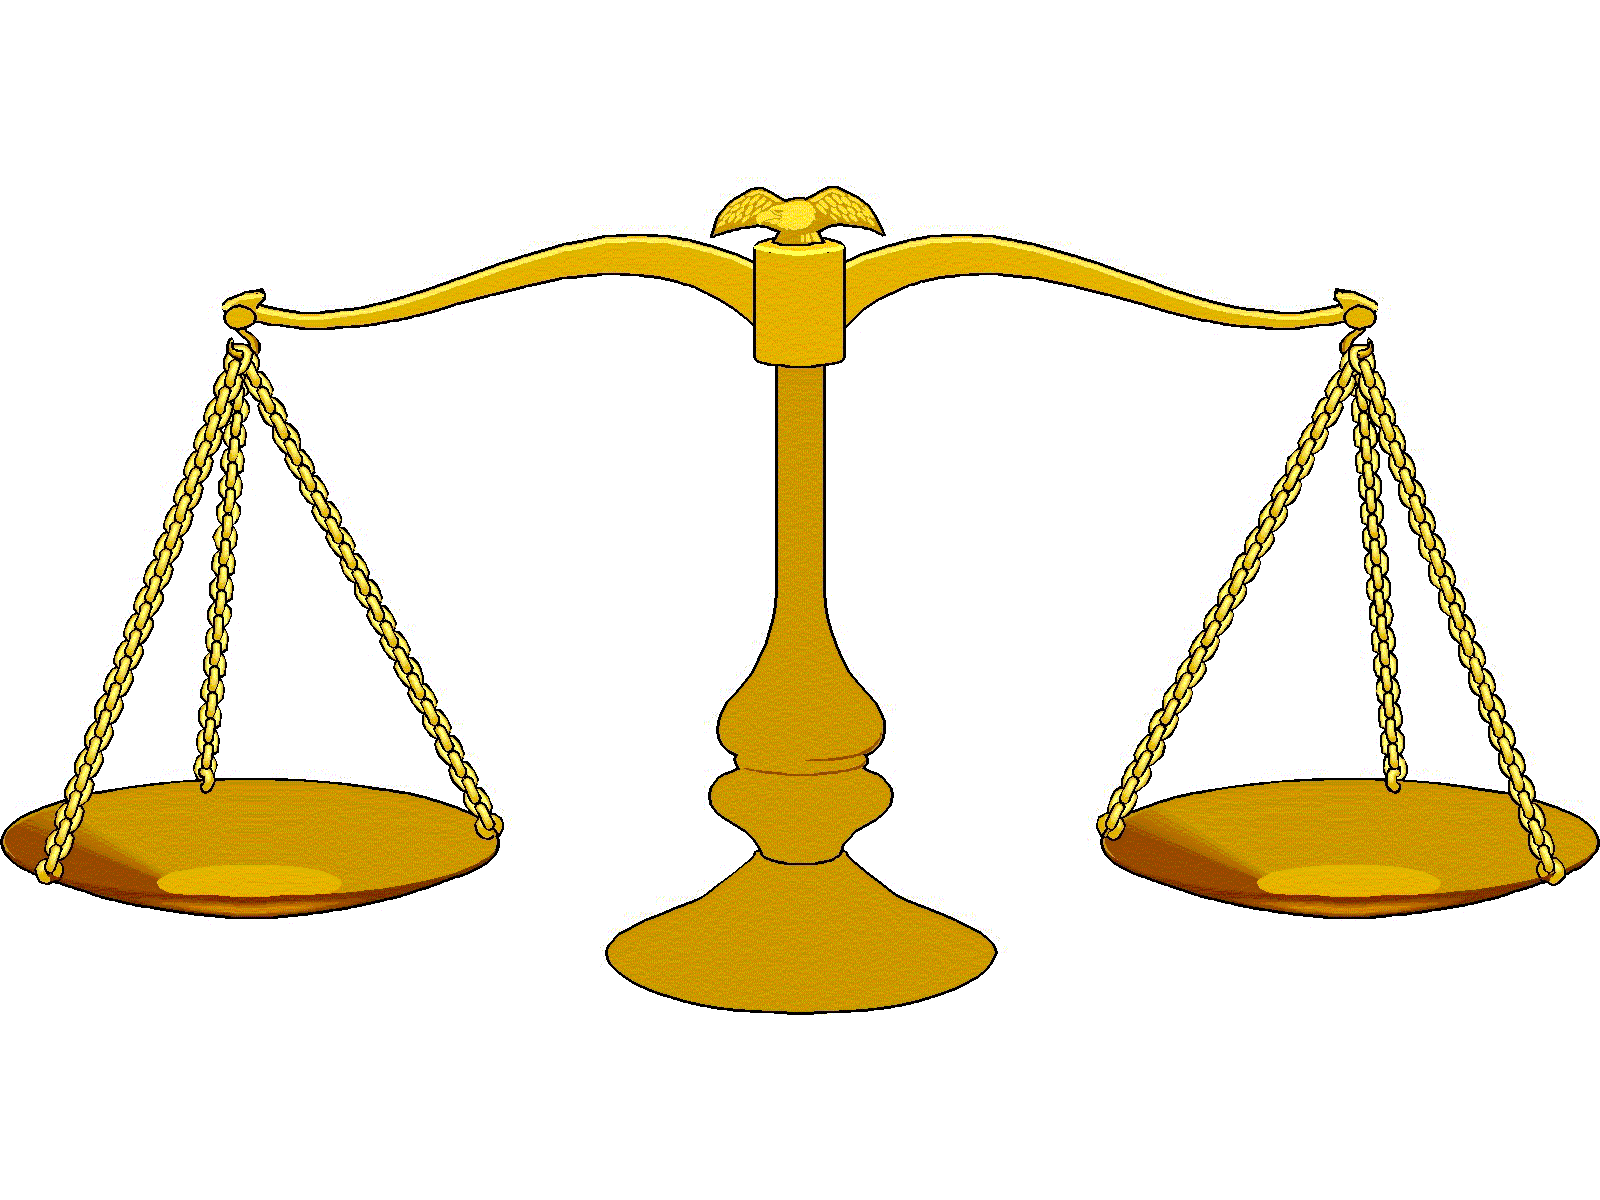 Balanced scales clipart